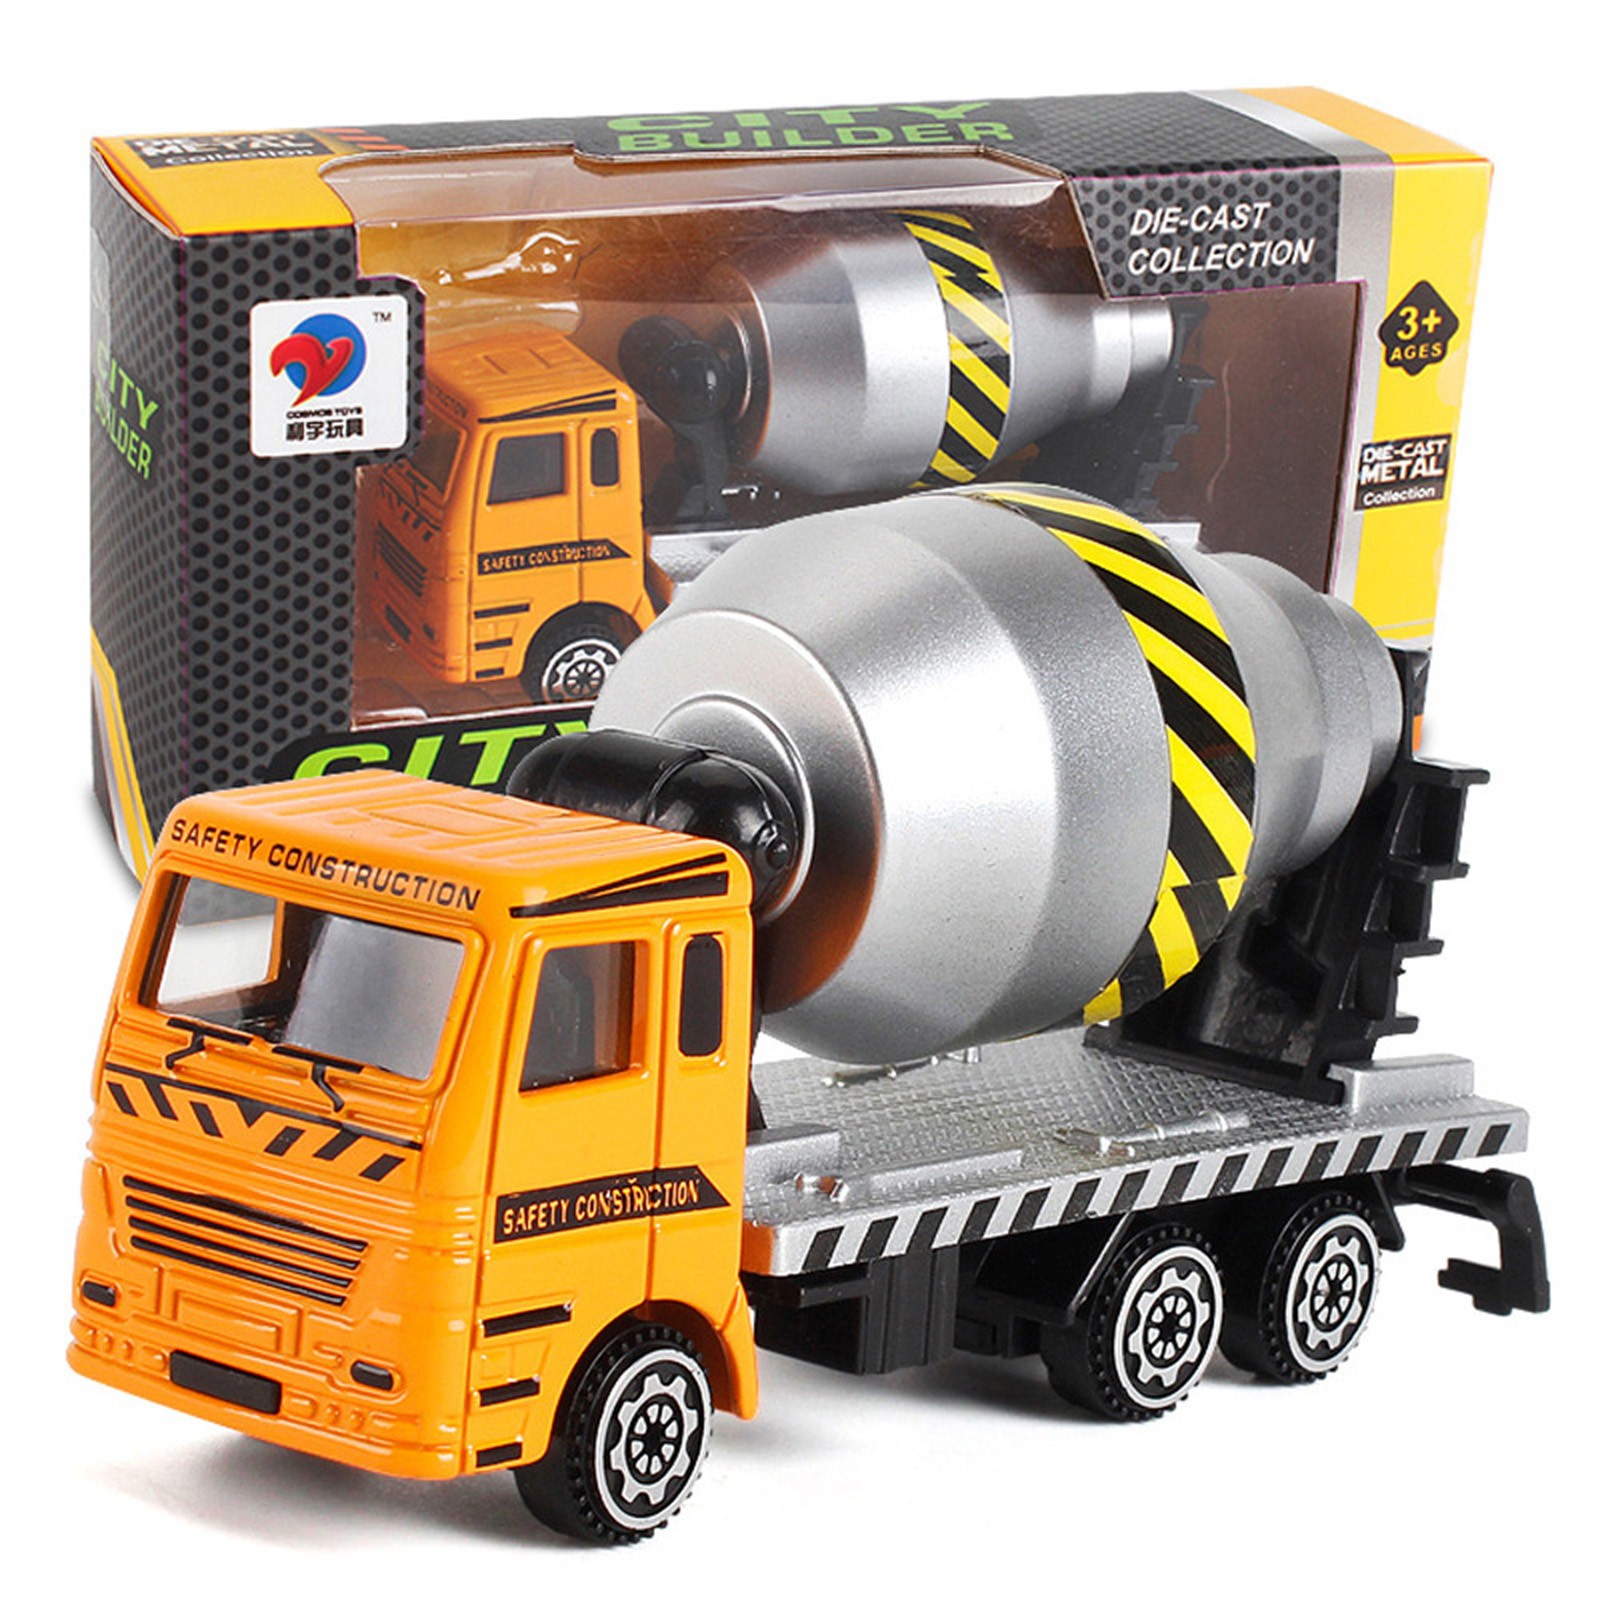 Tarmeek Construction Truck Toys with Crane for 2 4 5 6 Years Old Boys, Kids Alloy Engineering Vehicle Sets, Tractor Trailer Excavator Dump Wheel Loader Cement Forklift, Car for Xmas Birthday Gifts - image 1 of 5